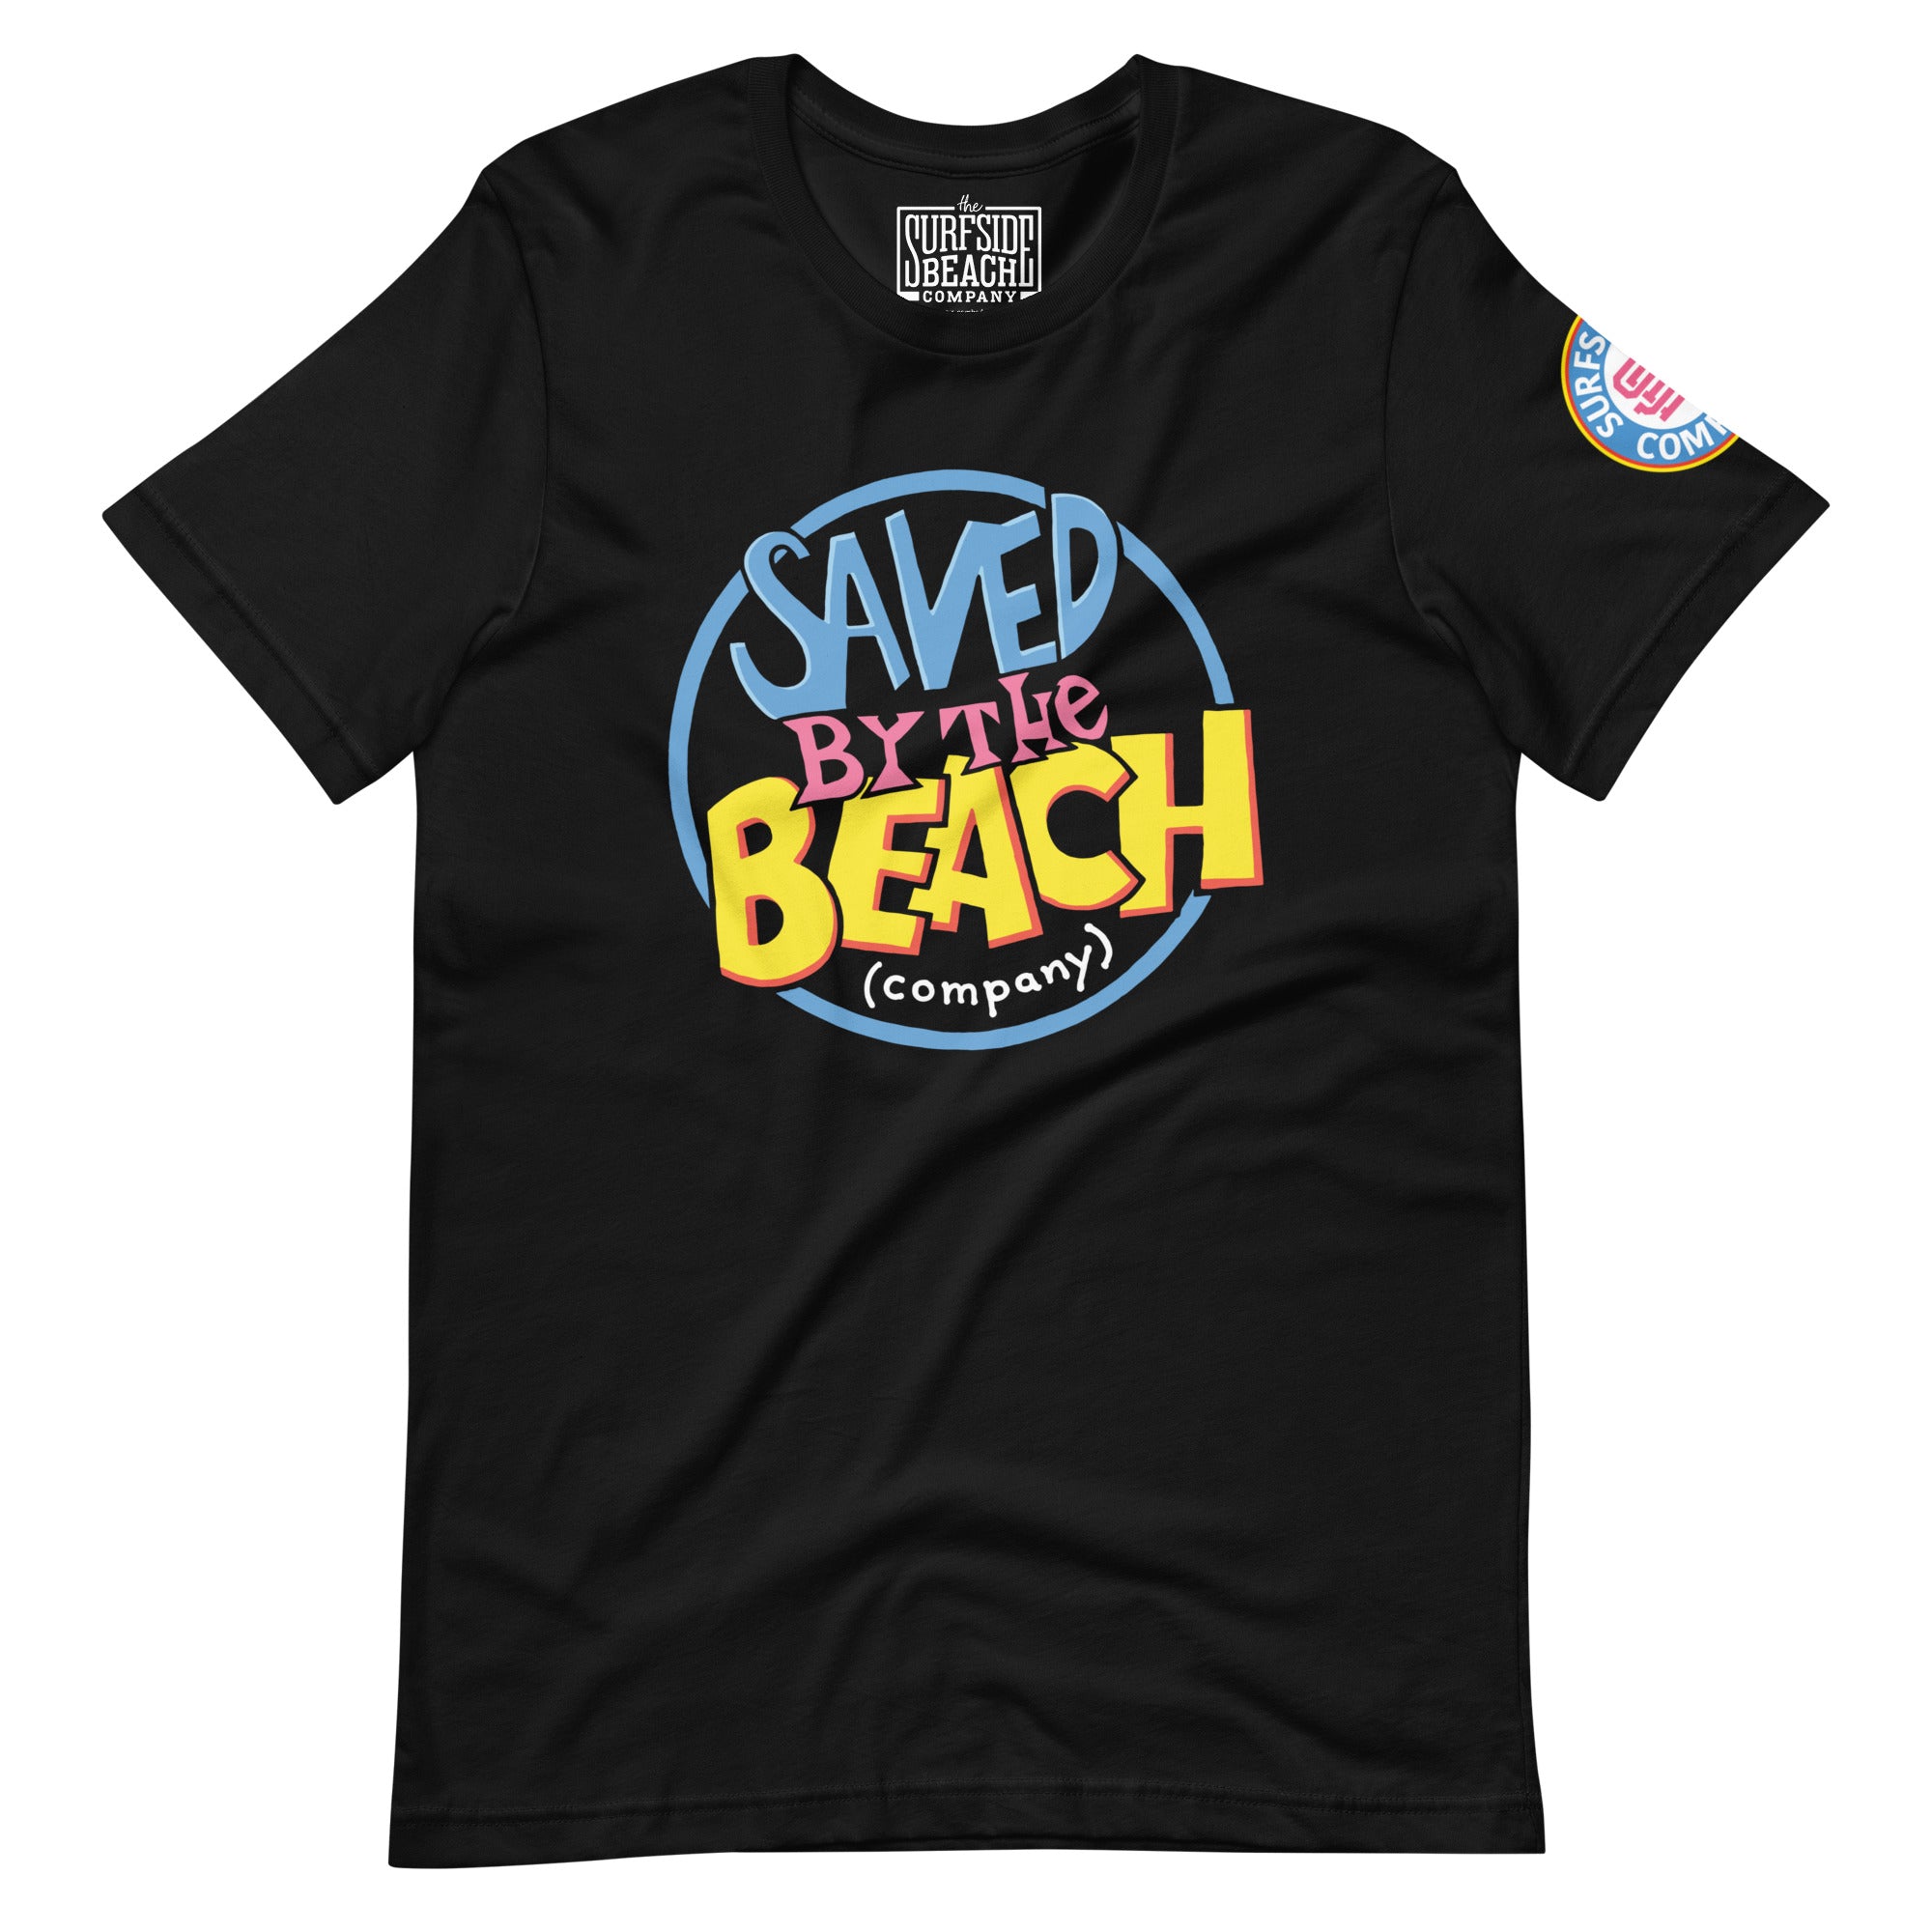 Saved by the Beach (Company) Unisex T-Shirt